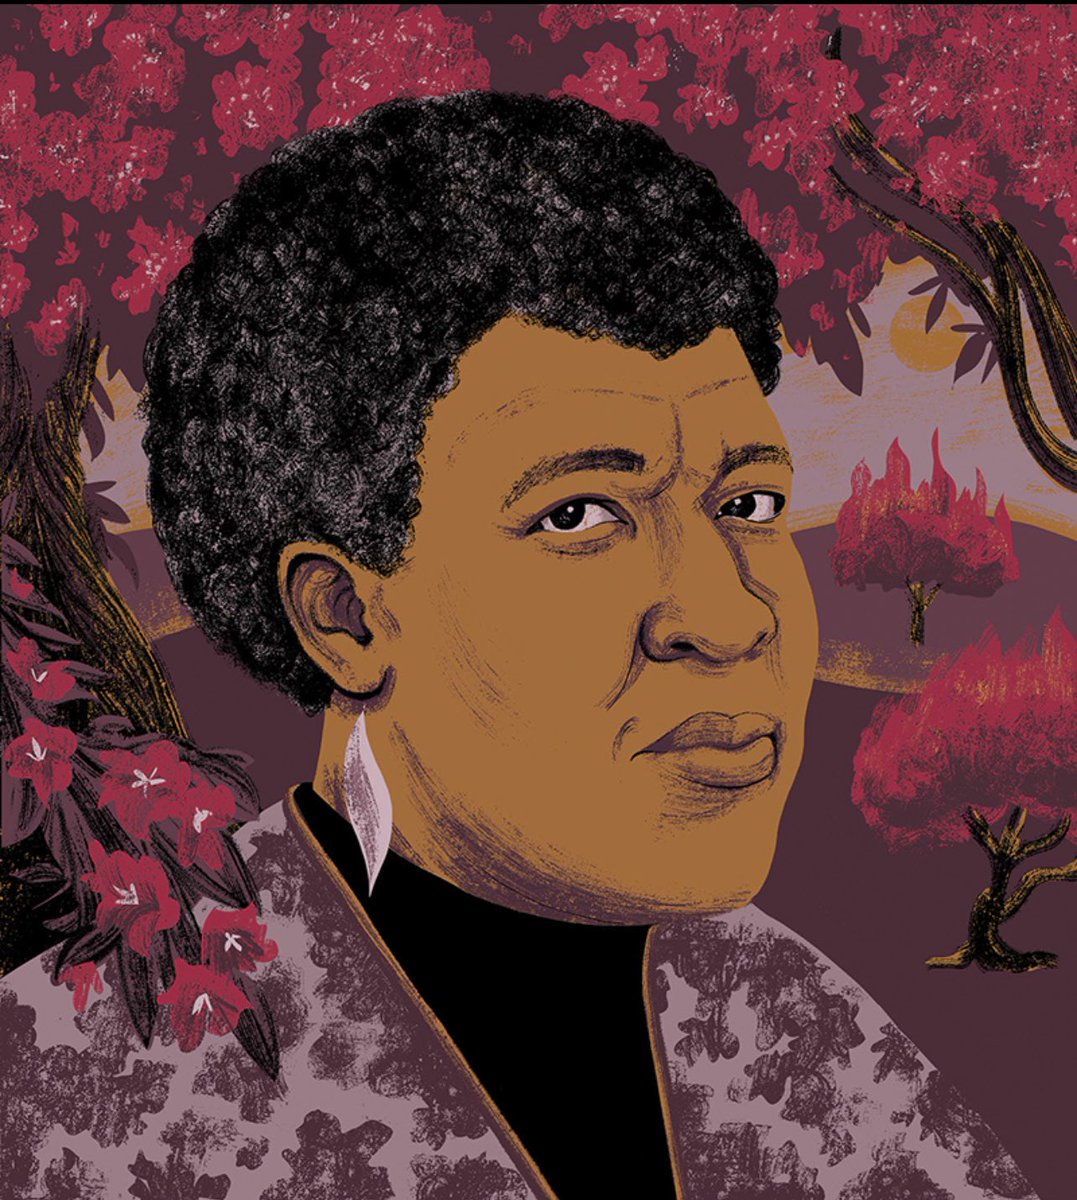 It’s Octavia Butler’s birthday! Celebrate with us by sharing your favorite quote, lesson, or idea from this legend!